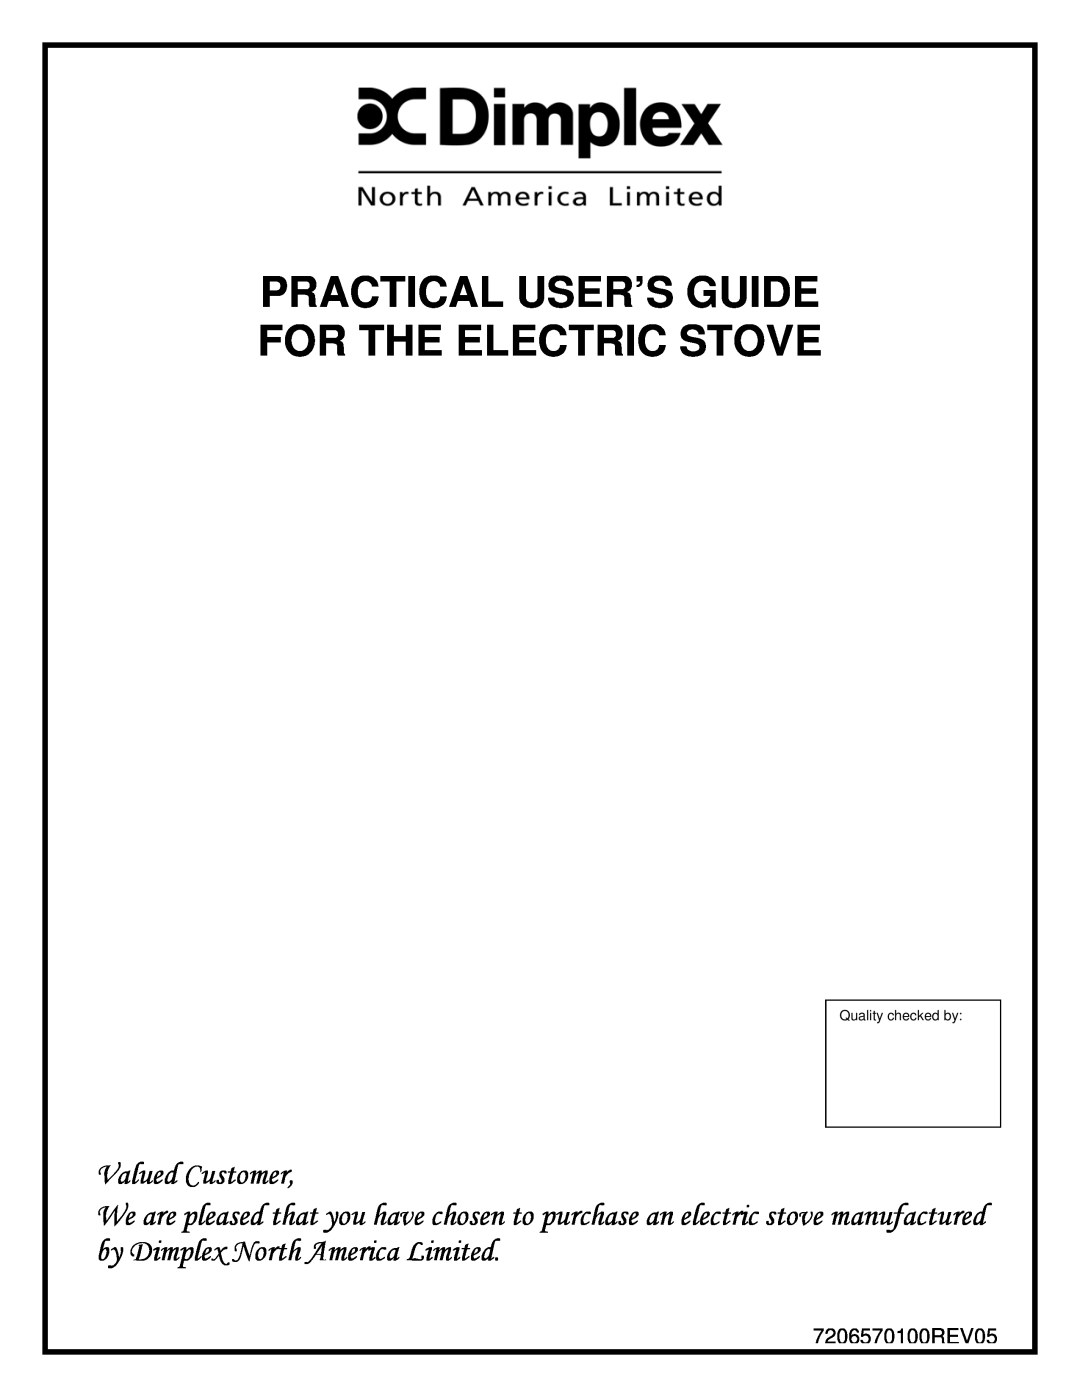 Dimplex THE ELECTRIC STOVE manual Practical User’S Guide For The Electric Stove, Valued Customer, Quality checked by 